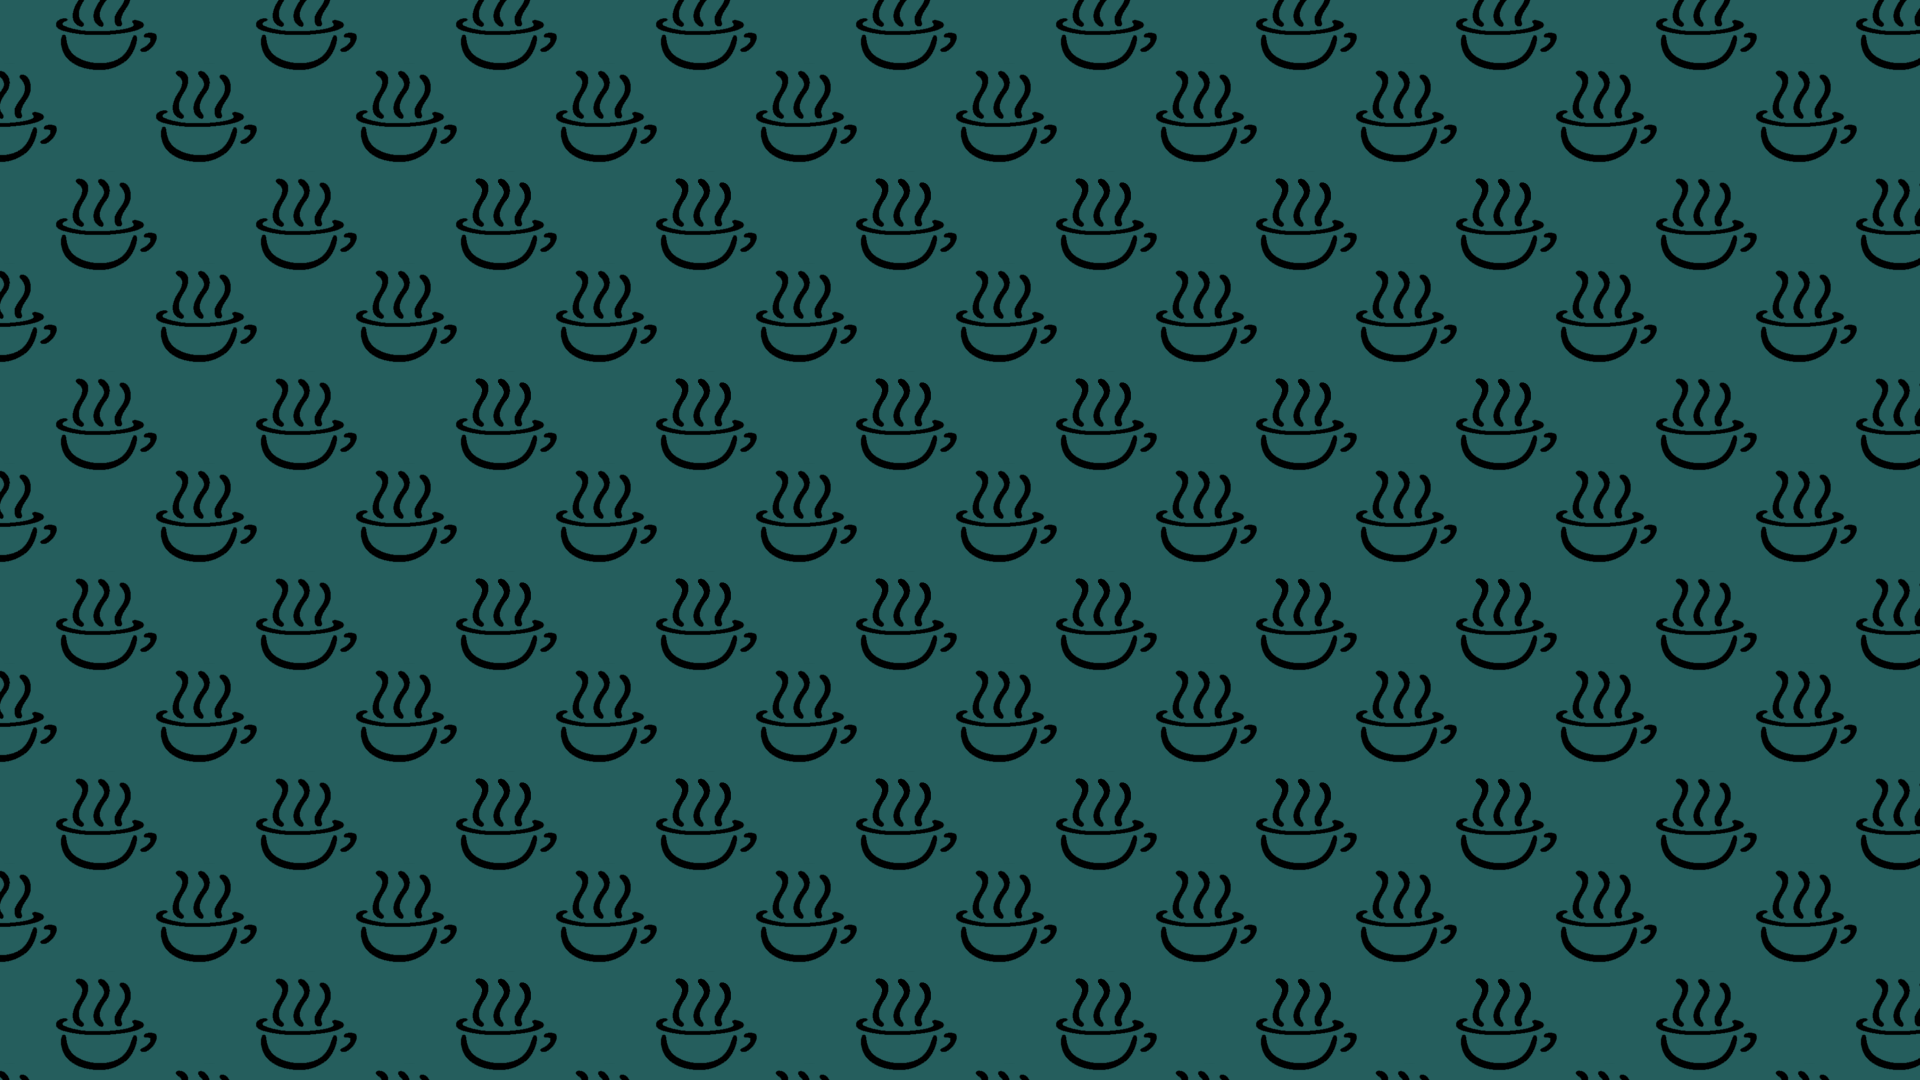 Tiled Logo Cup K ON Repetition Pattern 1920x1080